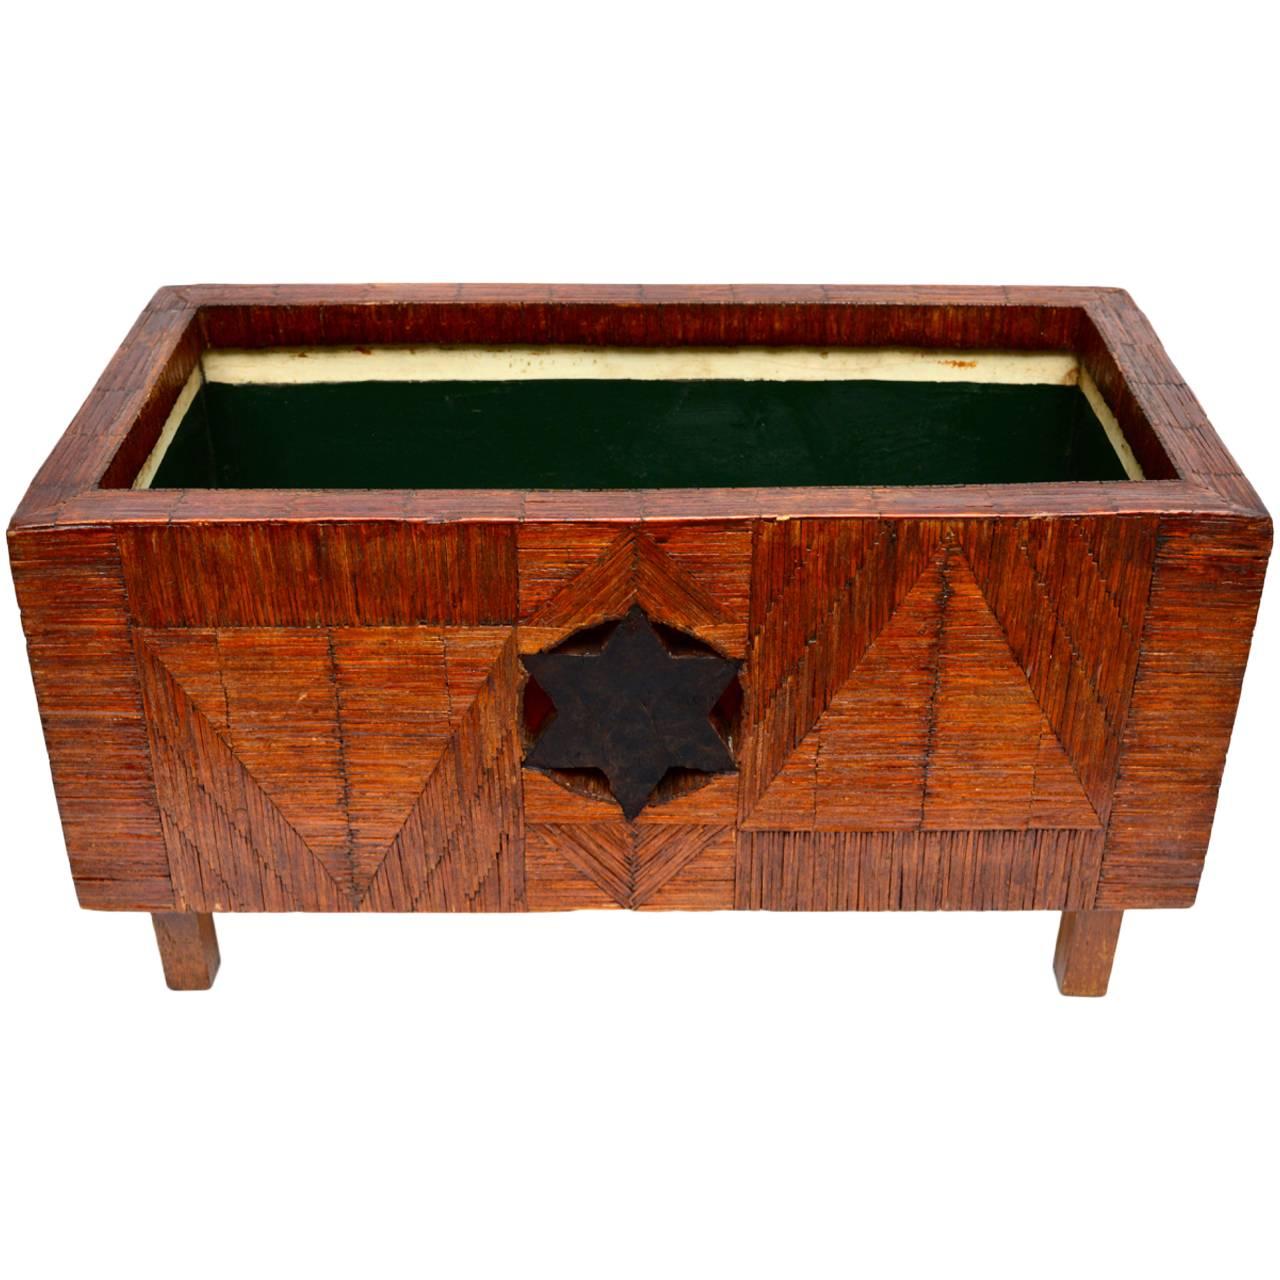 French Folk Art "Prison Art" Matchstick Inlaid Planter With A Star, circa 1930 For Sale